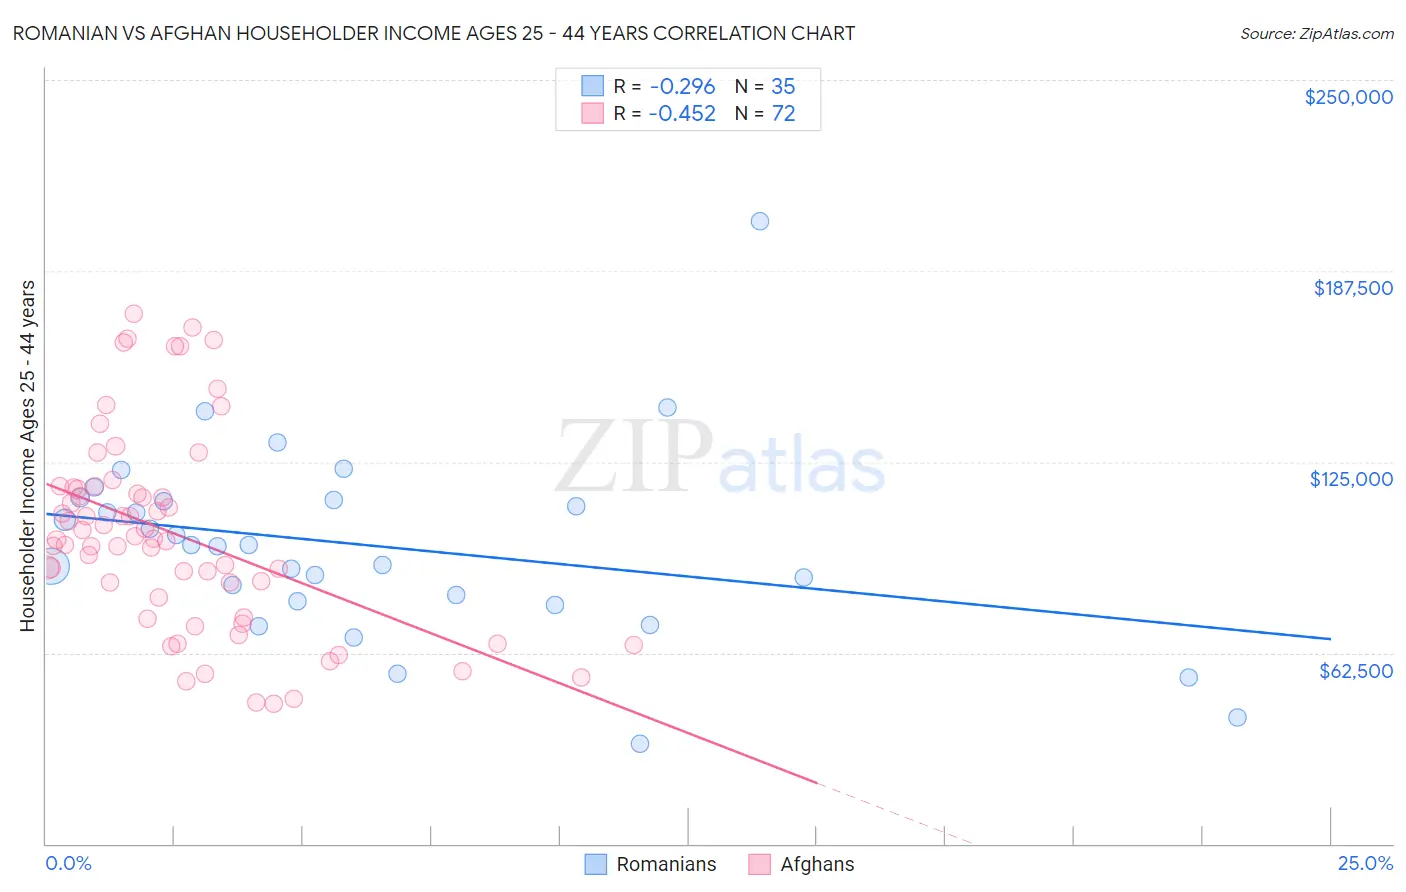 Romanian vs Afghan Householder Income Ages 25 - 44 years